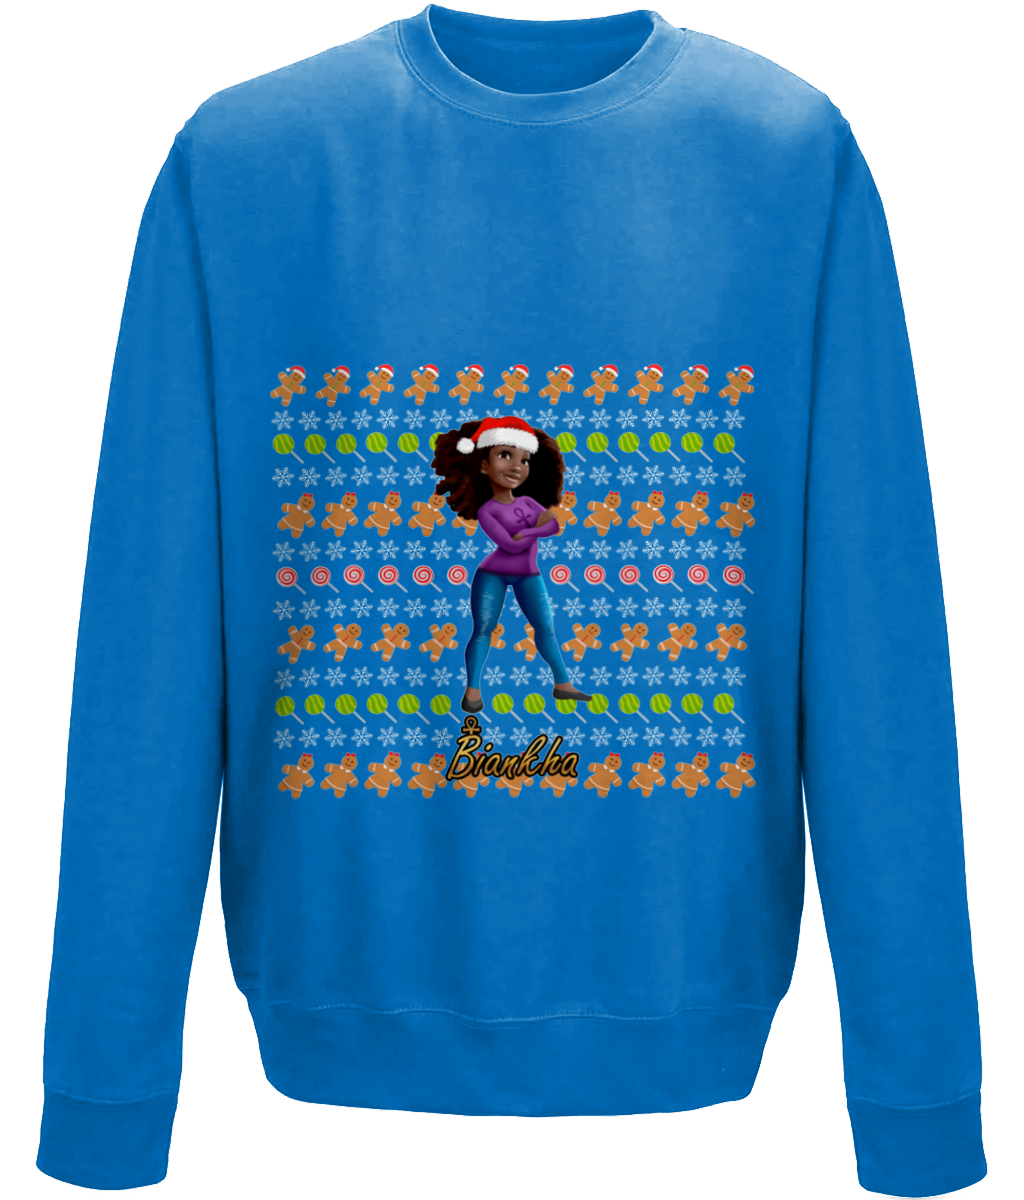 Biankha With Gingerbreads Kids Christmas Jumper